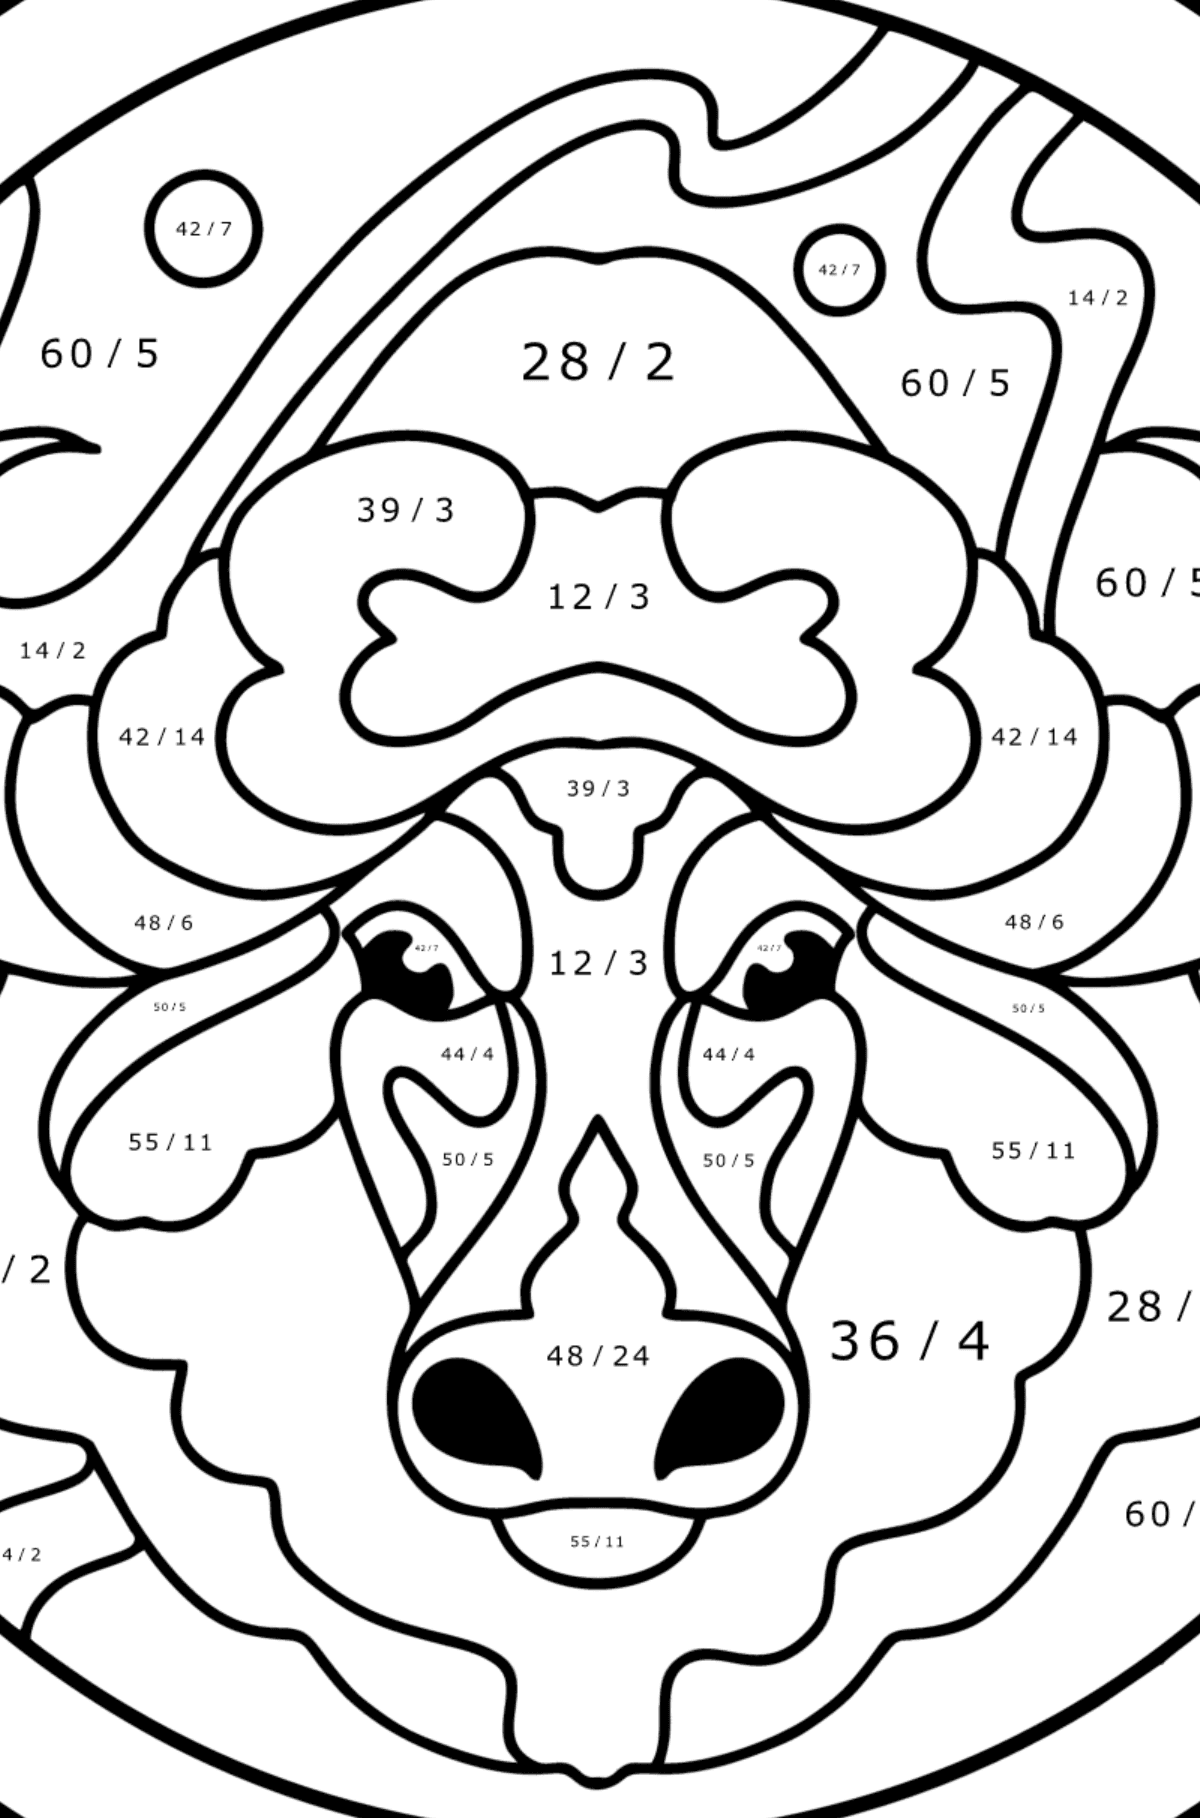 Coloring page for kids - zodiac sign Taurus - Math Coloring - Division for Kids